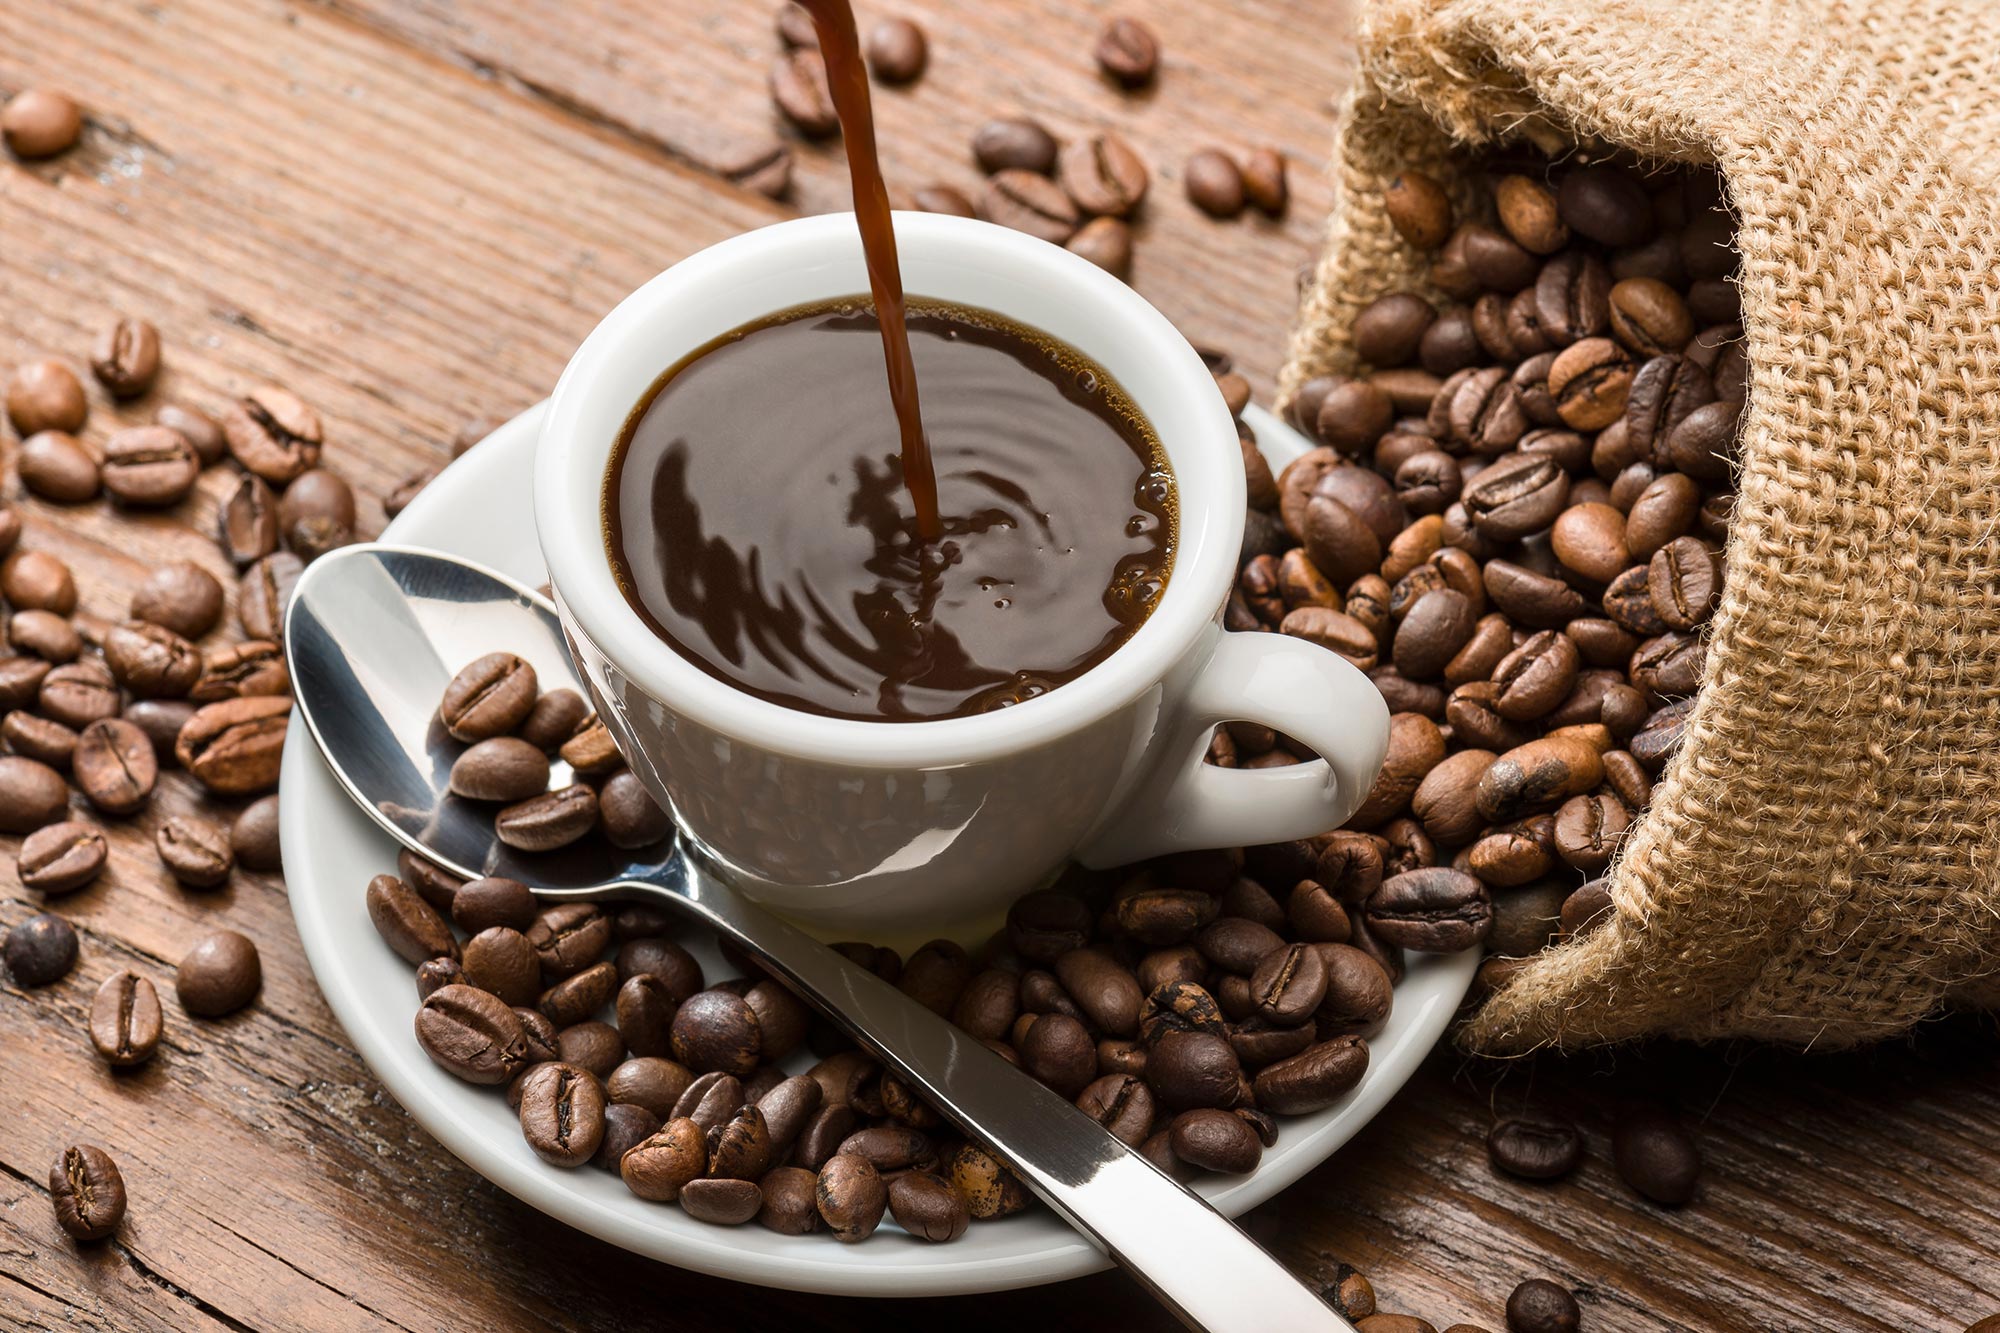 https://scitechdaily.com/images/Pouring-Espresso-Coffee-Beans.jpg